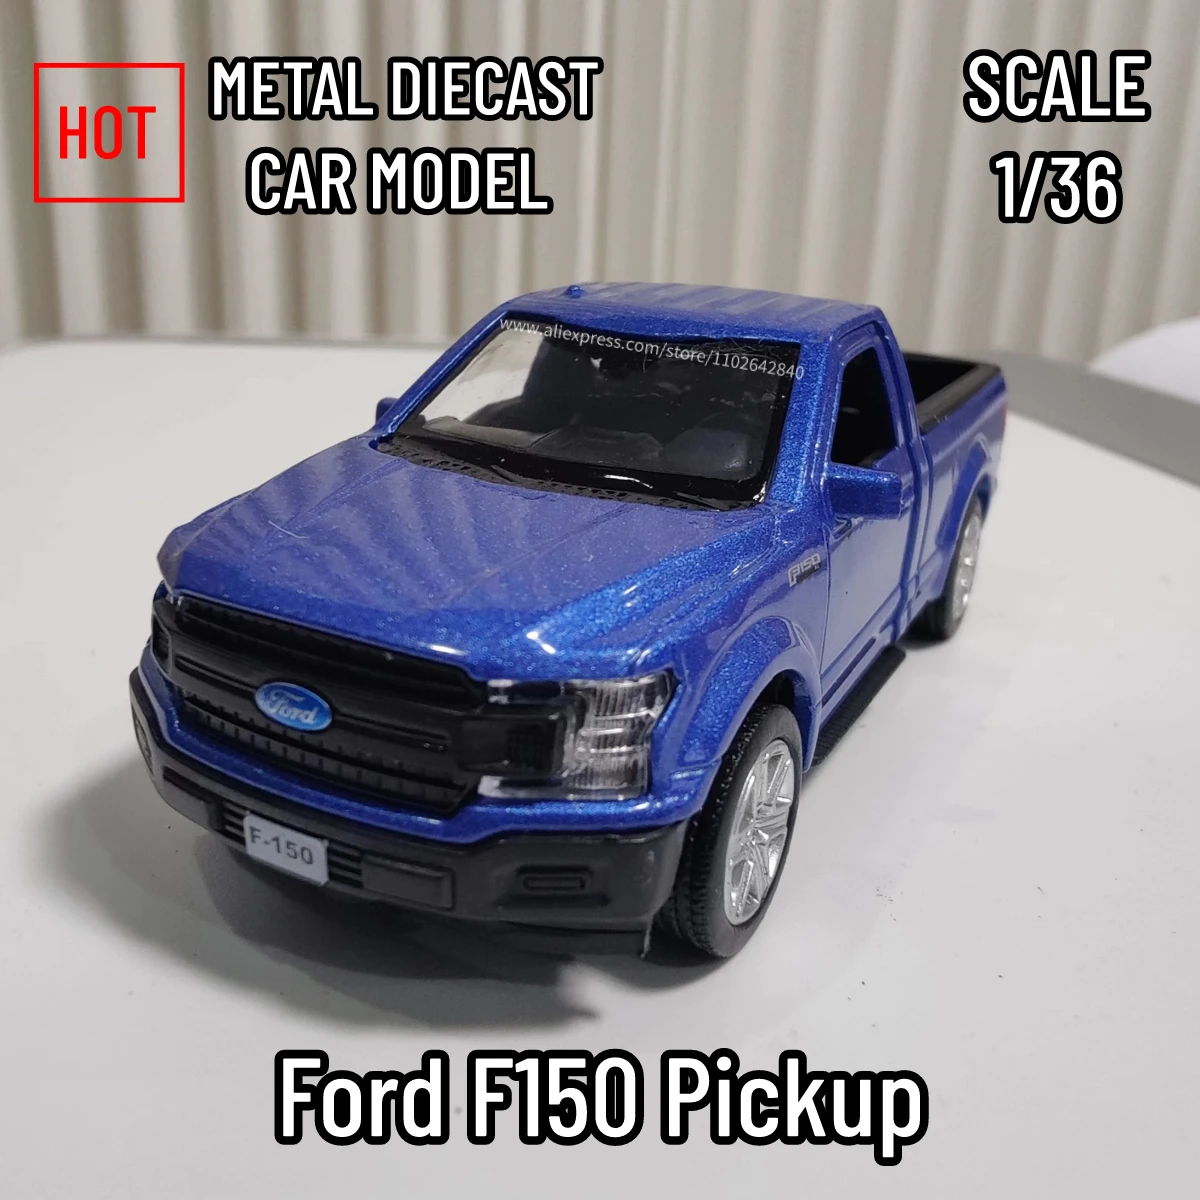 1/36 Scale Ford F150 Pickup Truck Car Model Replica Diecast Collection Vehicle Interior Decor Ornament Xmas Gift Kid Boy Toy